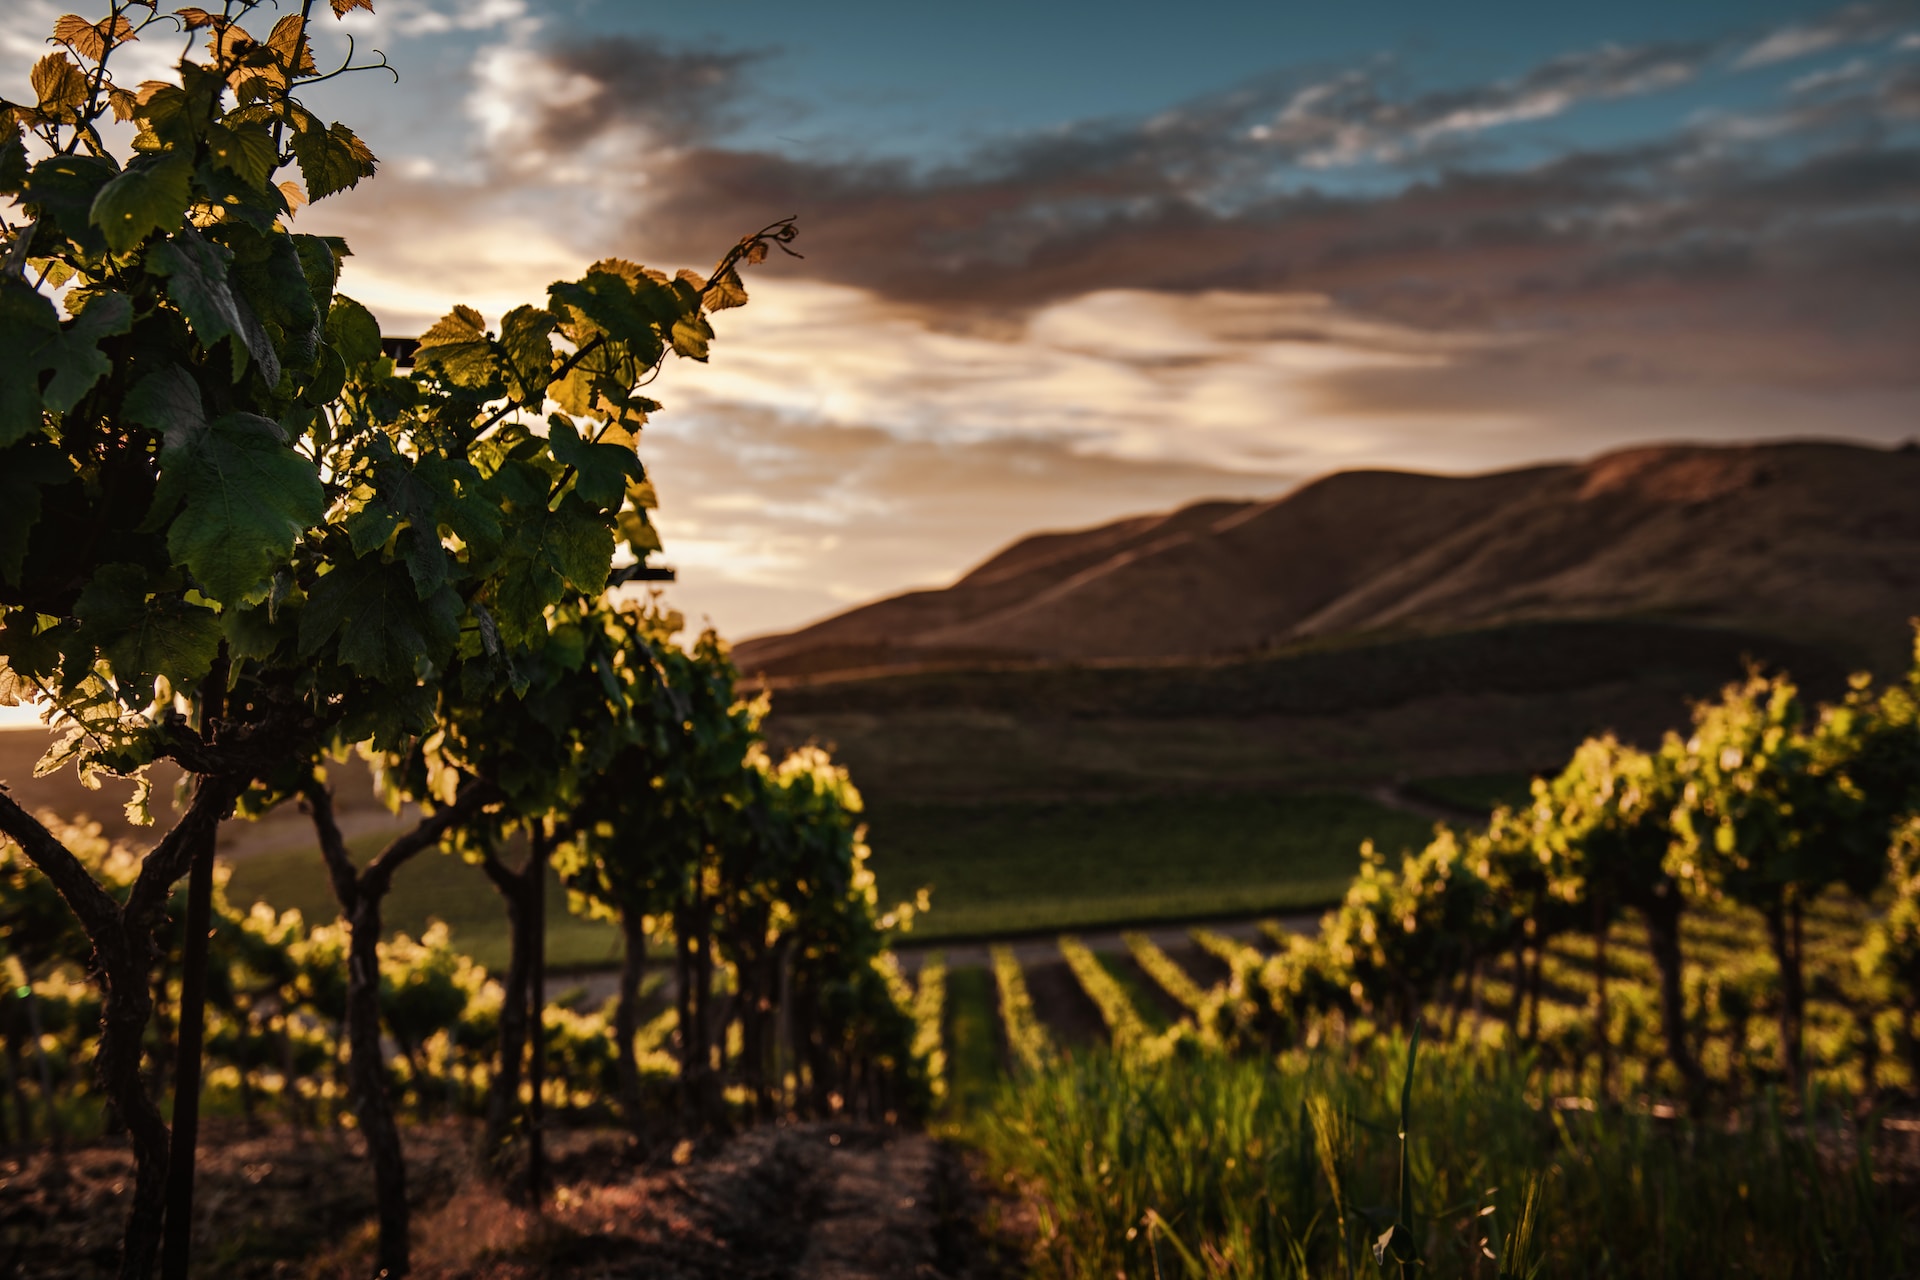 The sun setting on rolling hills covered in vineyards.